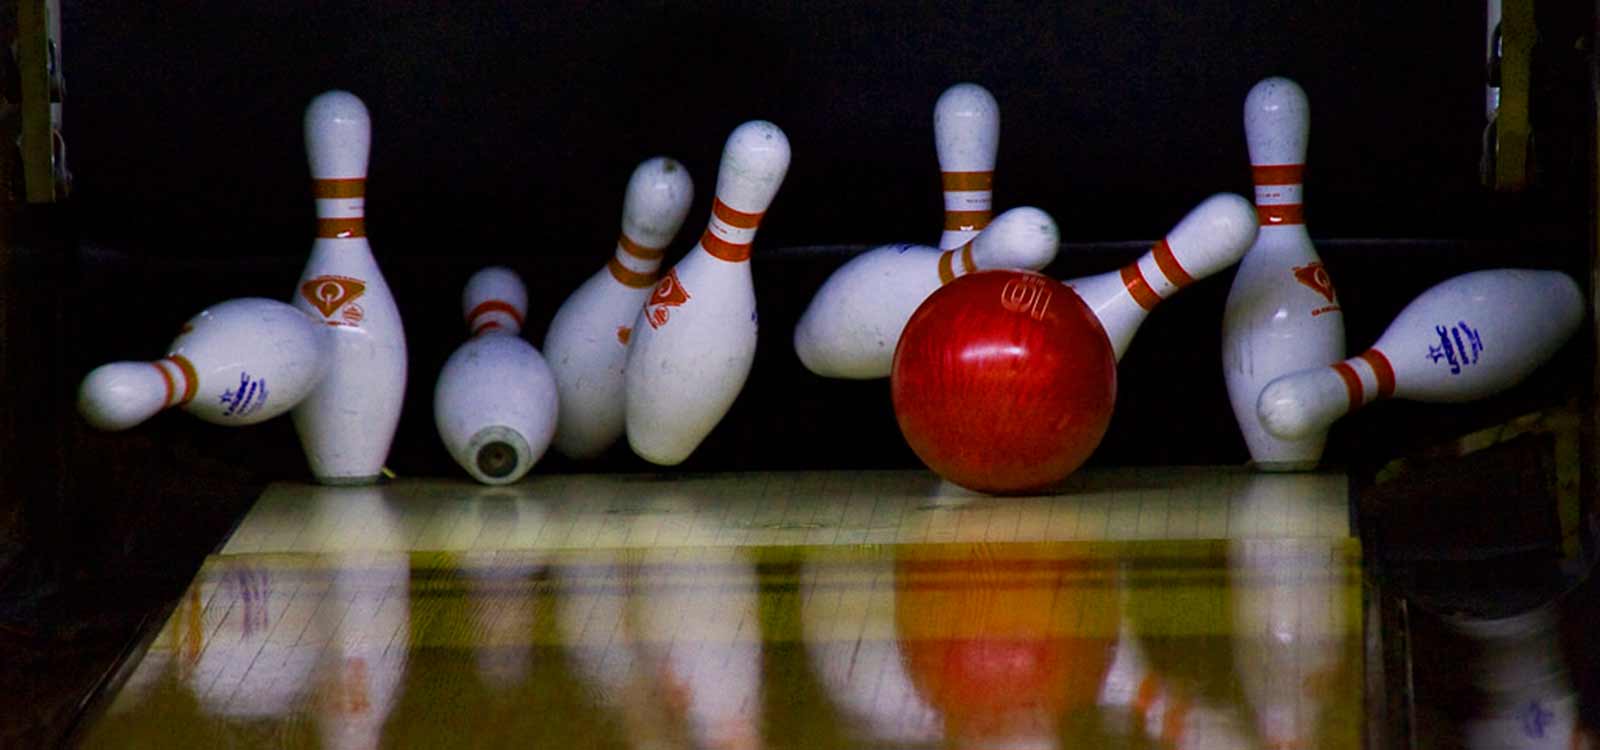 6 Ways to Take Your Bowling Game from Gutter Balls to Strikes